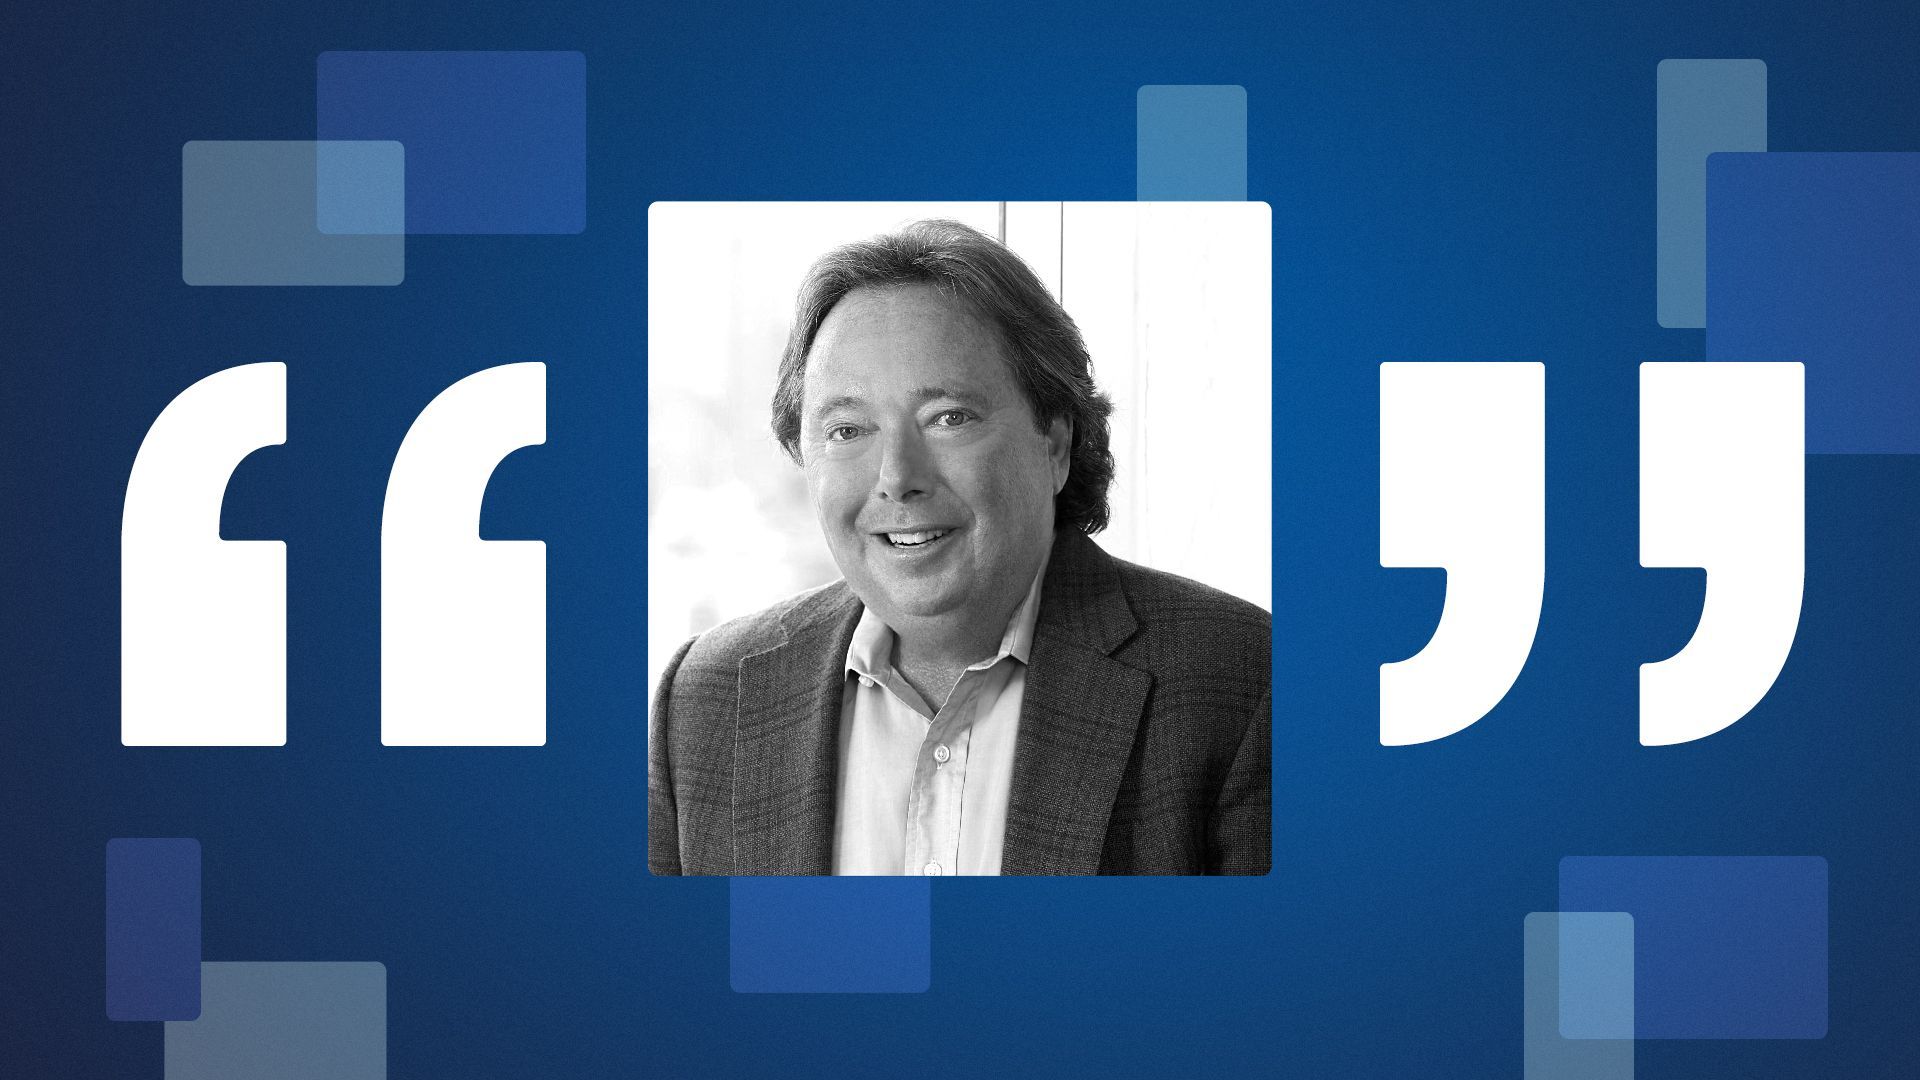 Photo illustration of Richard Gelfond surrounded by quotation marks and abstract shapes.